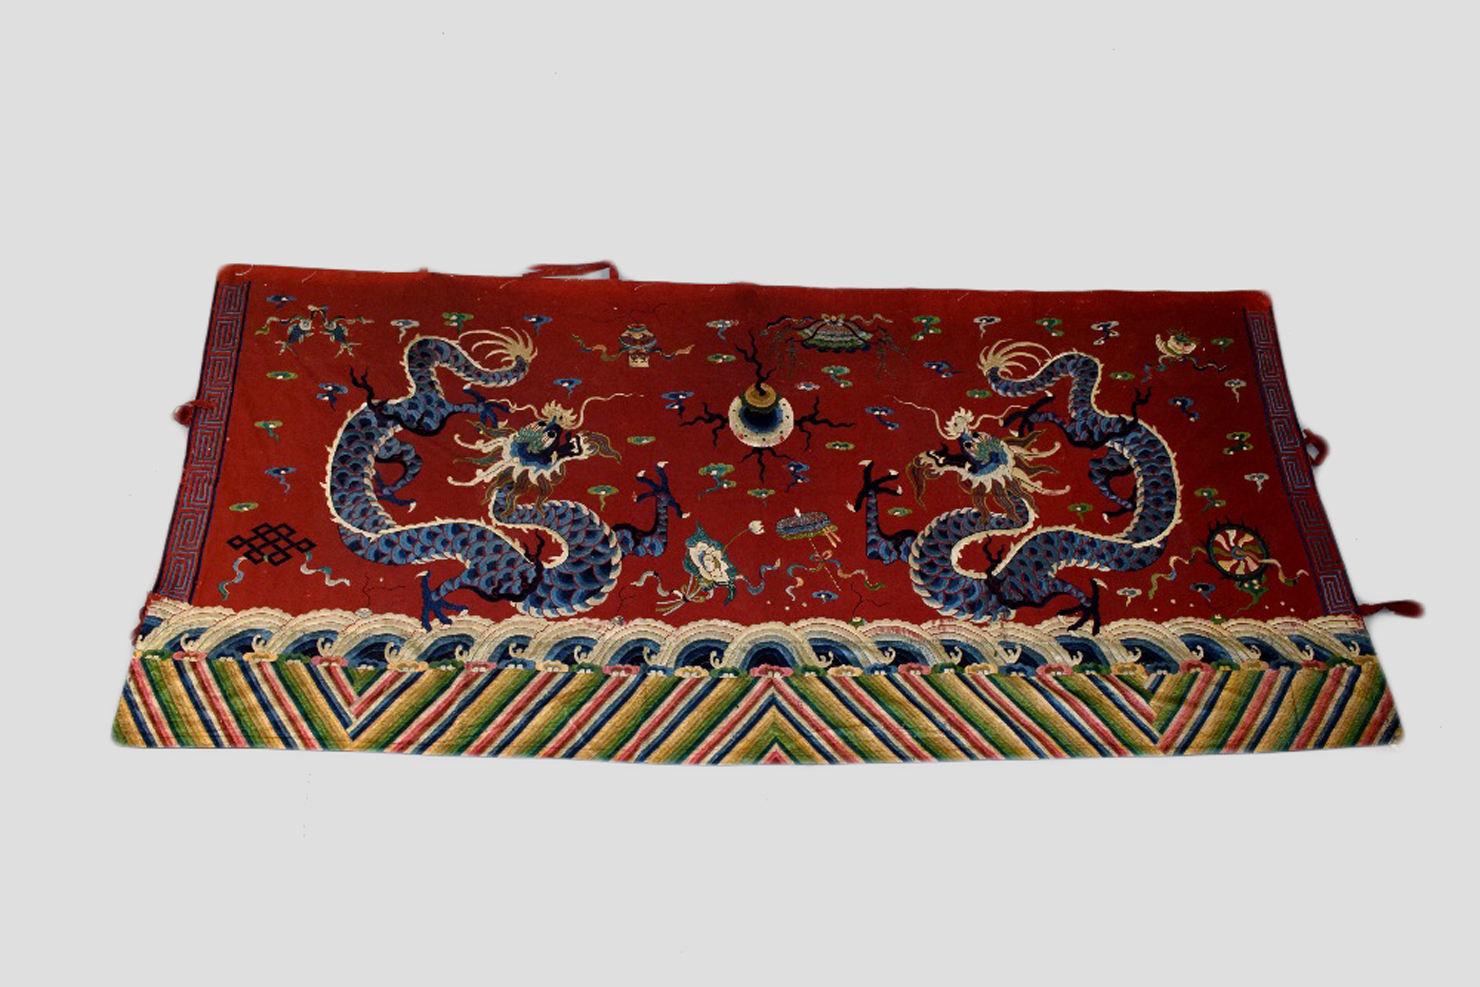 Chinese temple hanging, late 19th century, 60in. x 128in. 153cm. x 325cm. Red felted wool ground